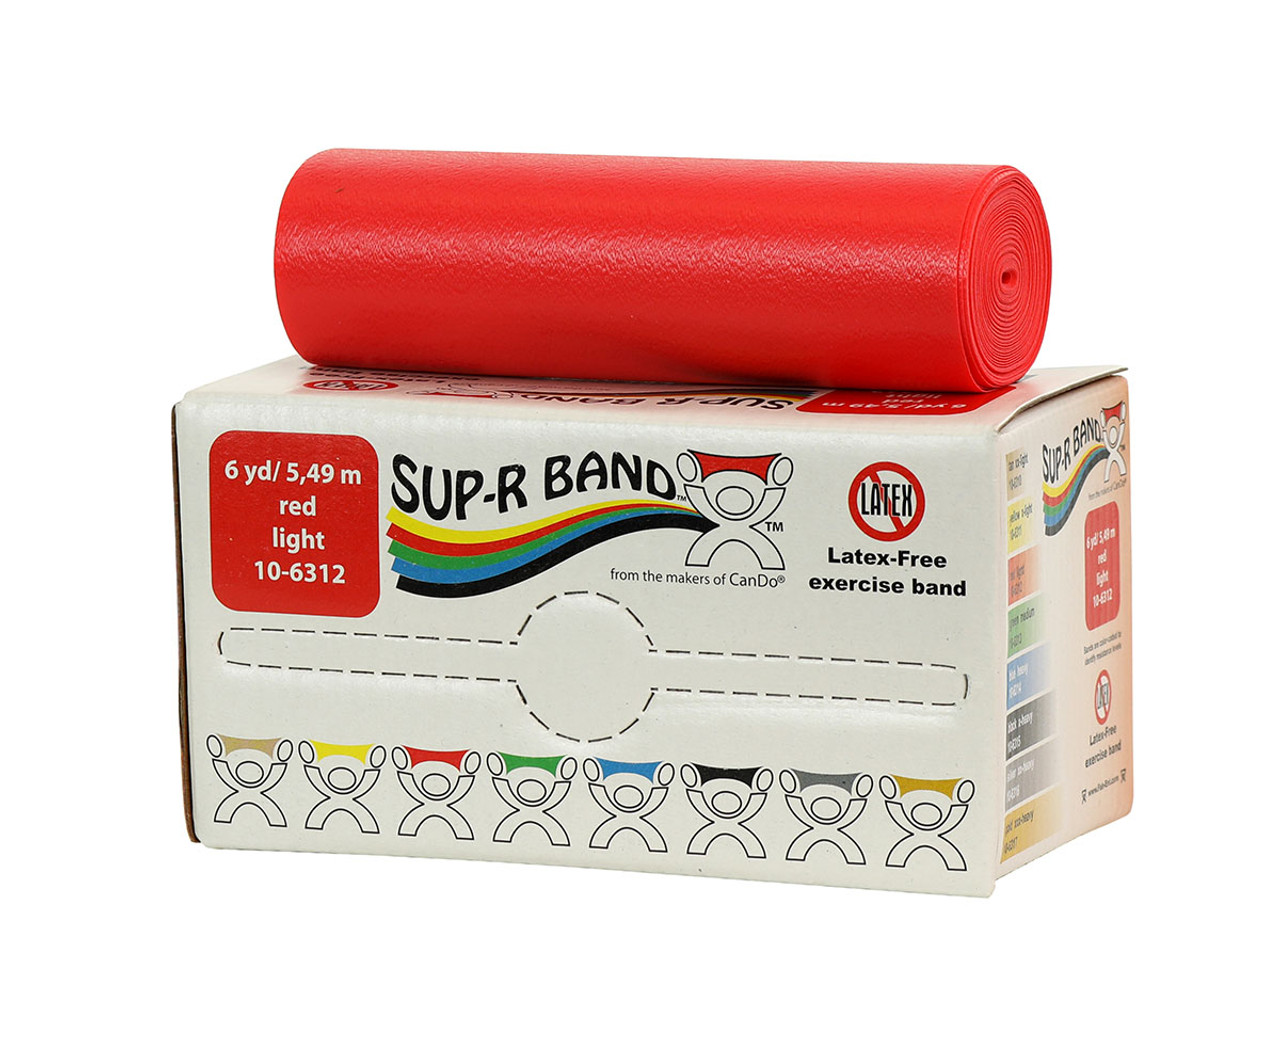 Sup-R Band¨ Latex Free Exercise Band - 6 yard roll - Red - light